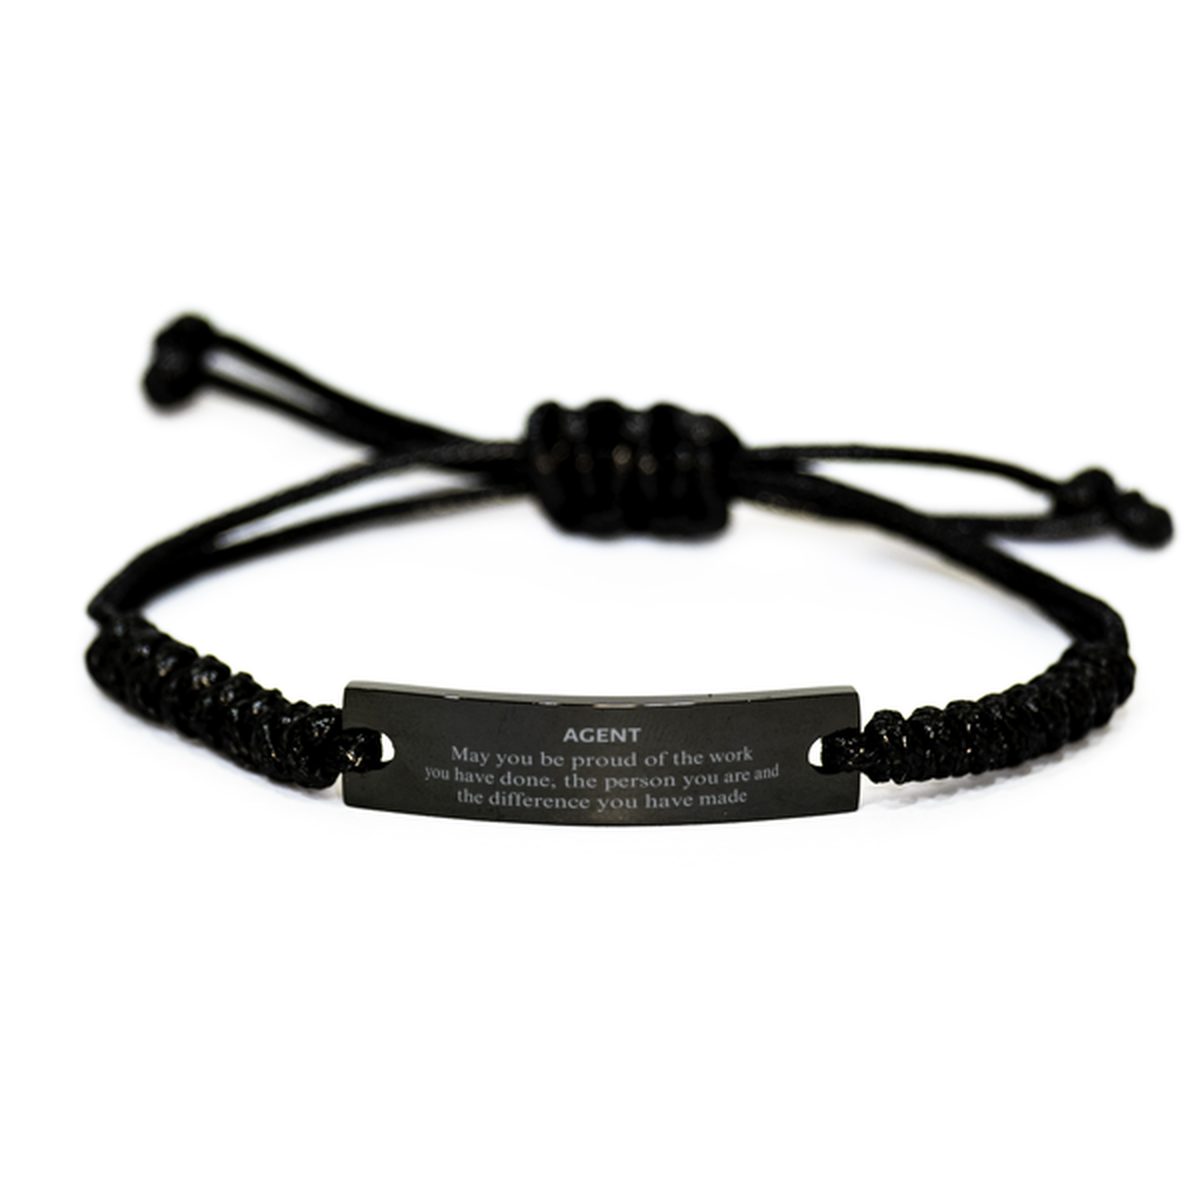 Agent May you be proud of the work you have done, Retirement Agent Black Rope Bracelet for Colleague Appreciation Gifts Amazing for Agent